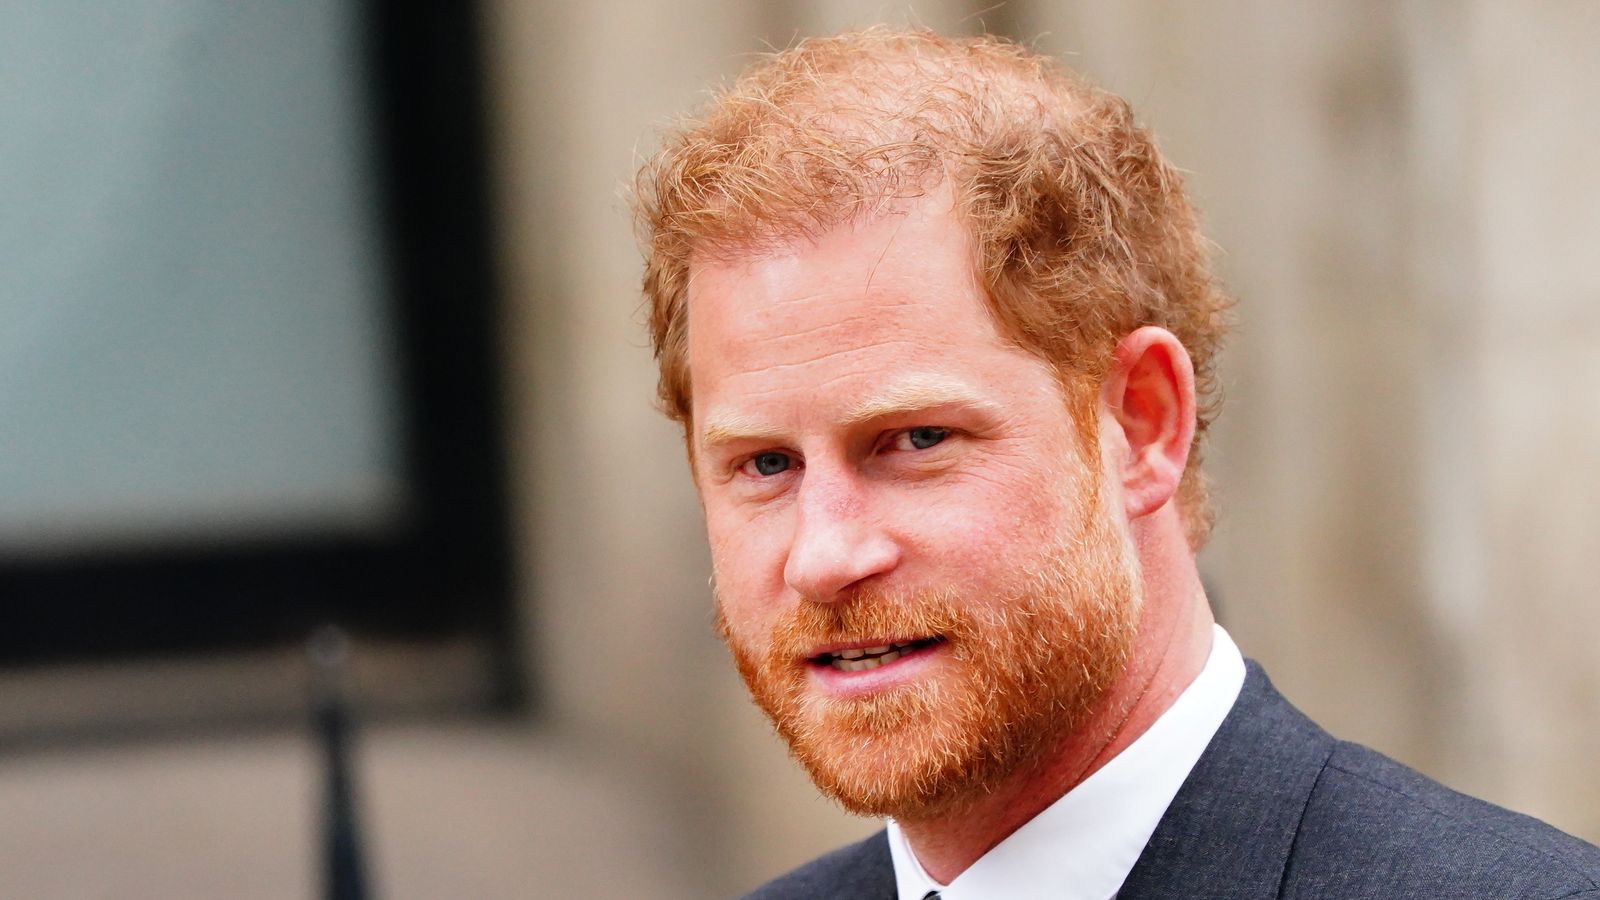 Prince Harry and Mirror publisher settle remaining parts of hacking claim - with newspaper group to pay 'substantial additional sum'